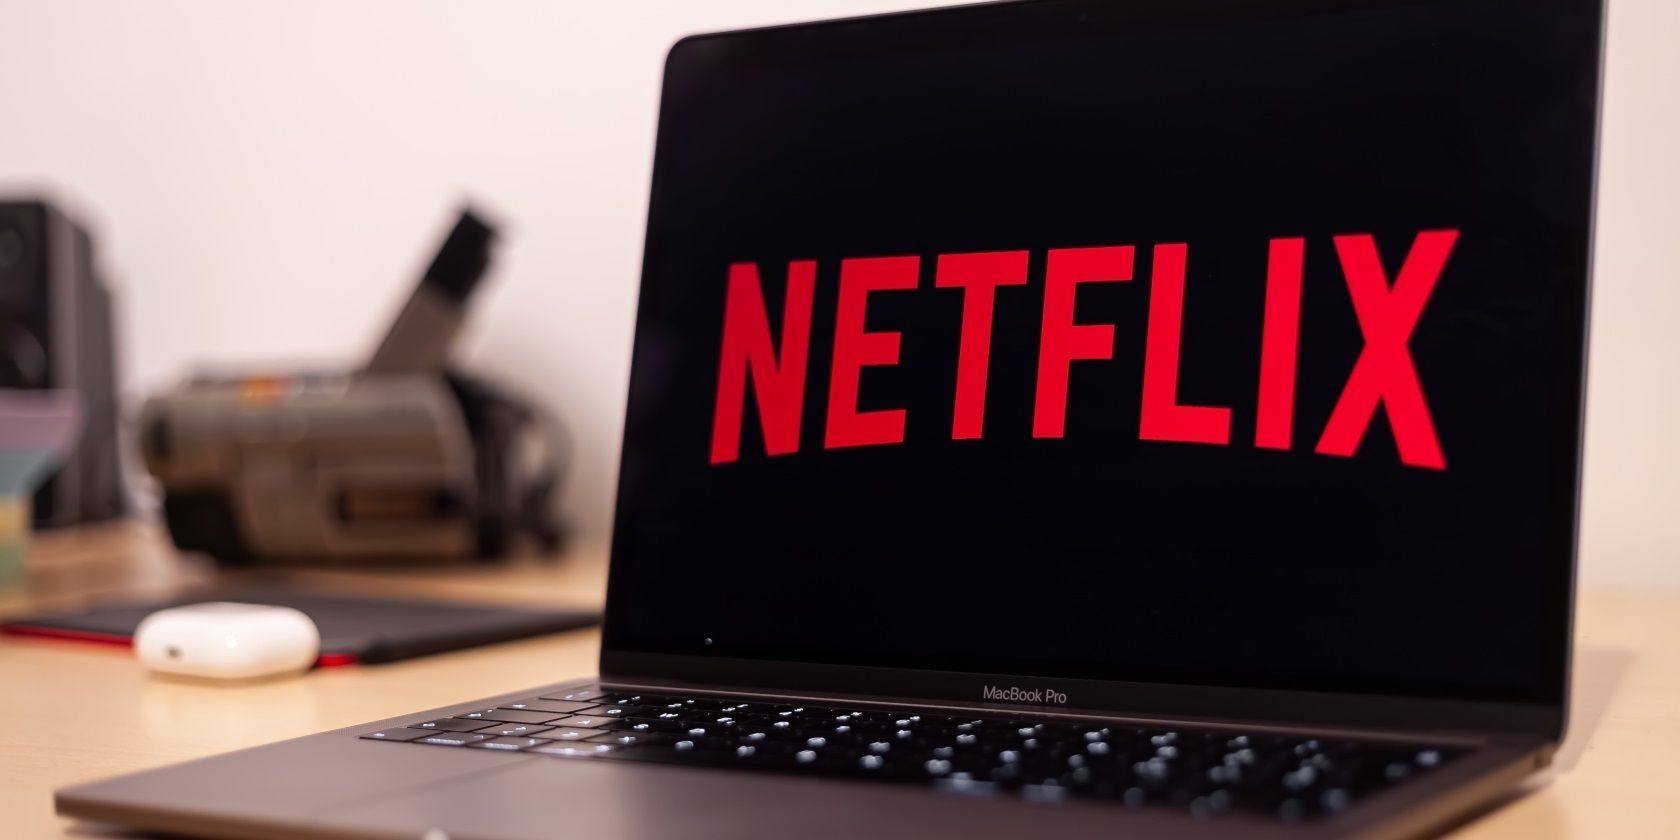 Has Your Netflix Account Been Hacked? What to Do Next